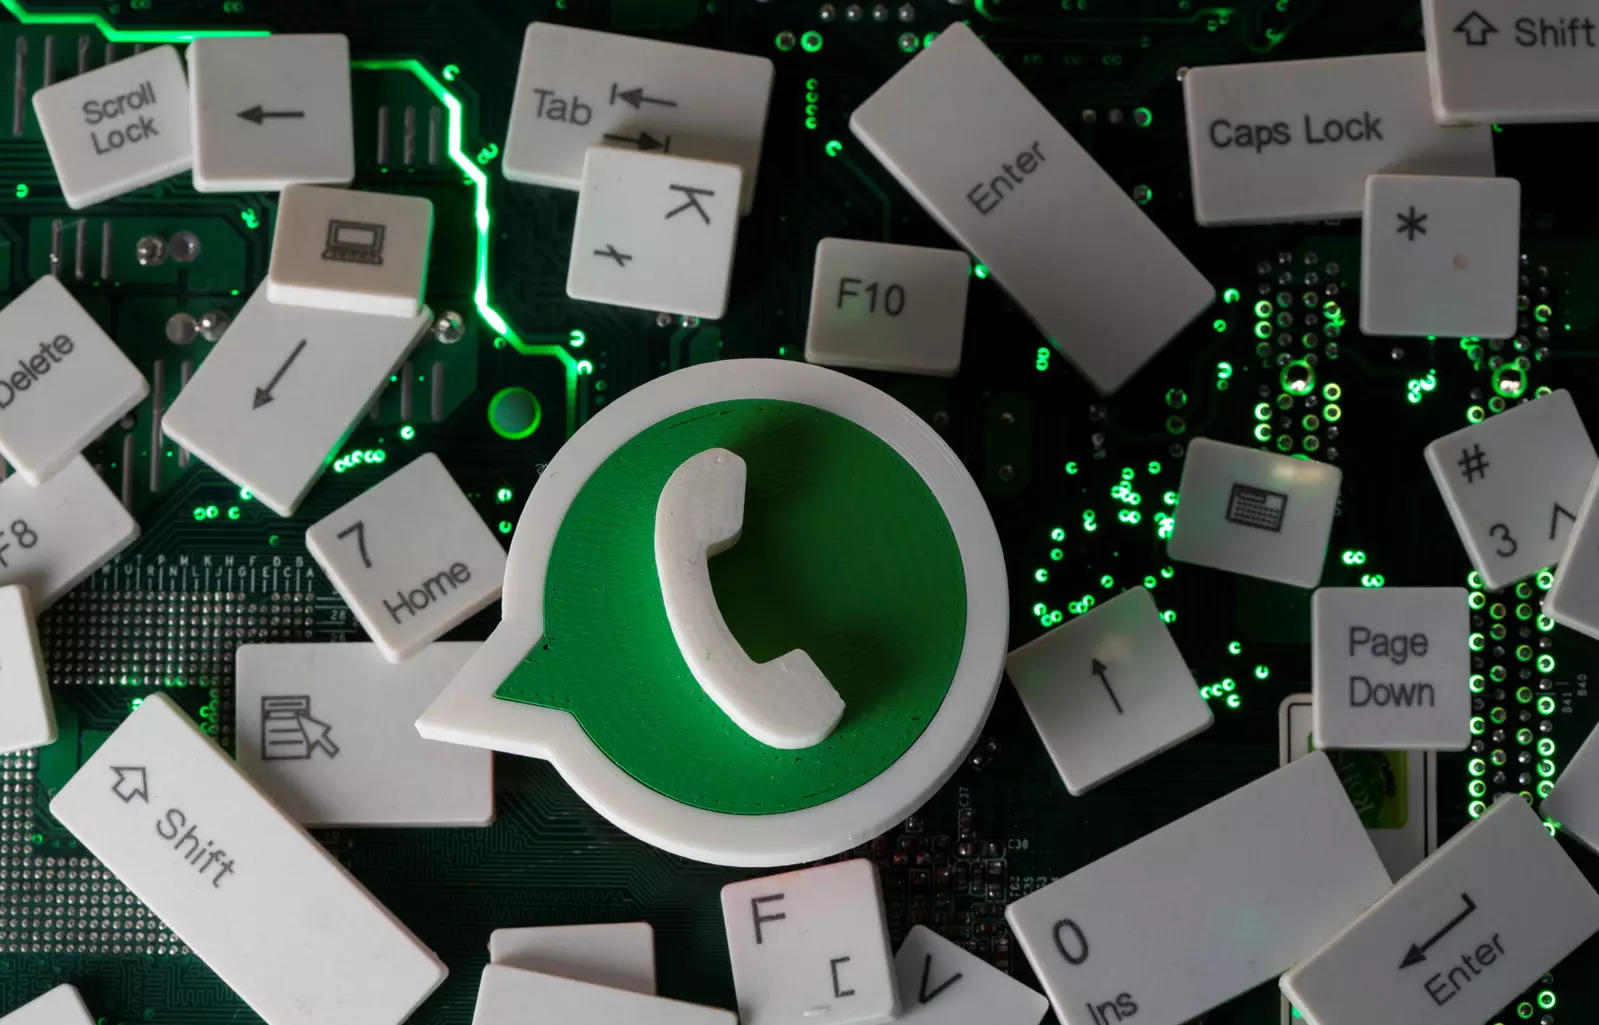 WhatsApp Chat History Transfer: WhatsApp appears set to solve one of the  biggest problems that users face while changing phones